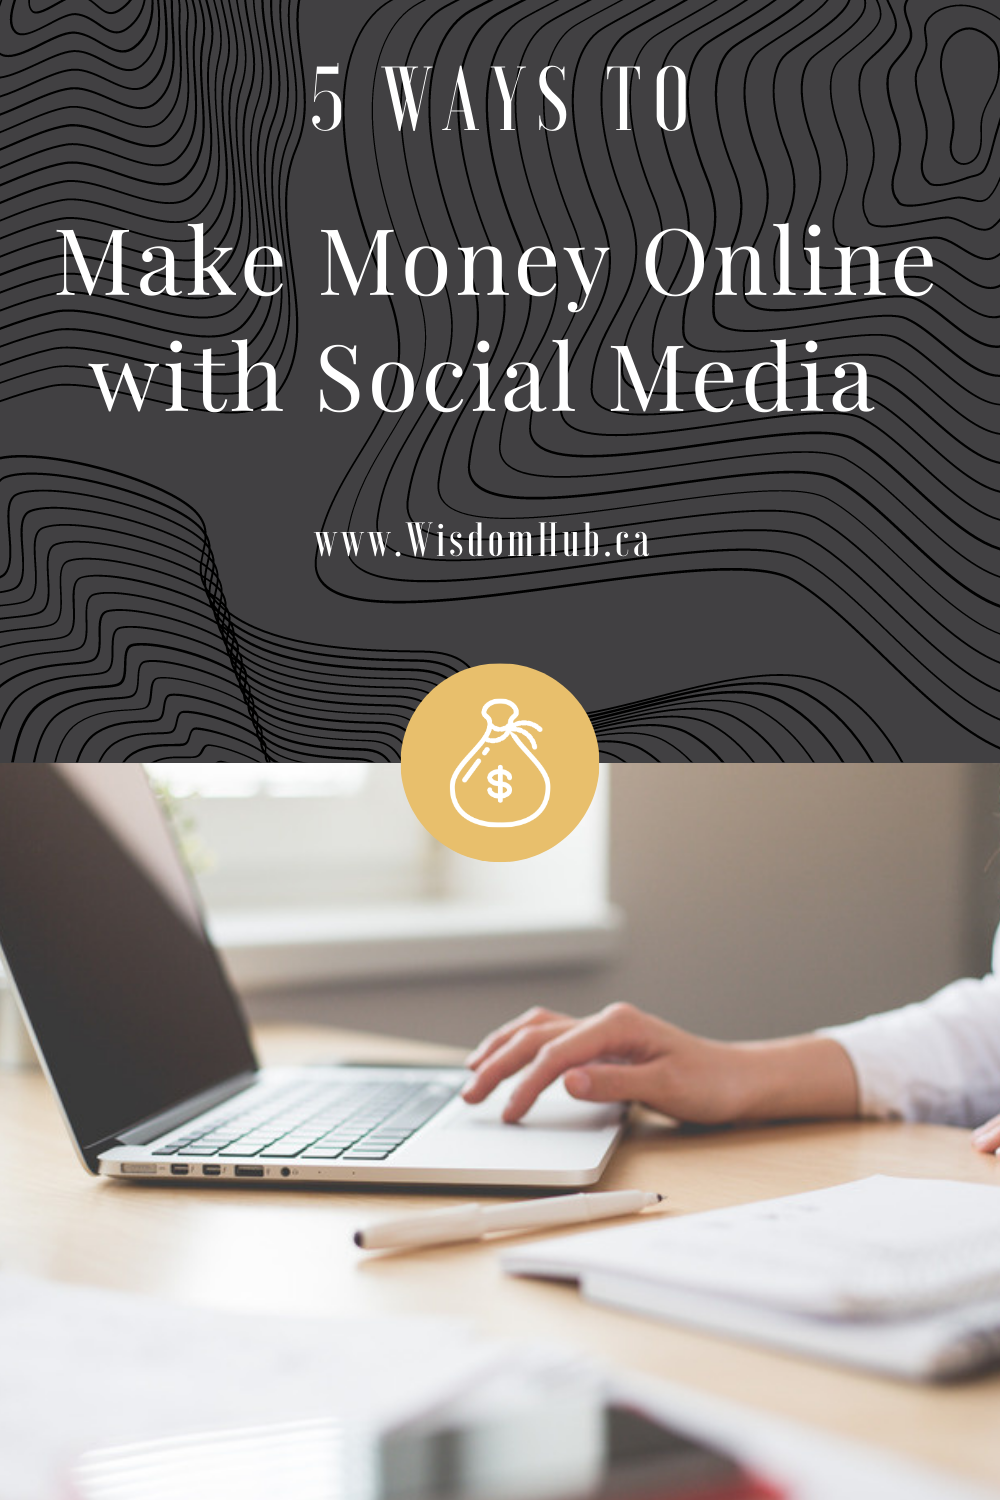 5 Ways to Make Money Online with Social Media